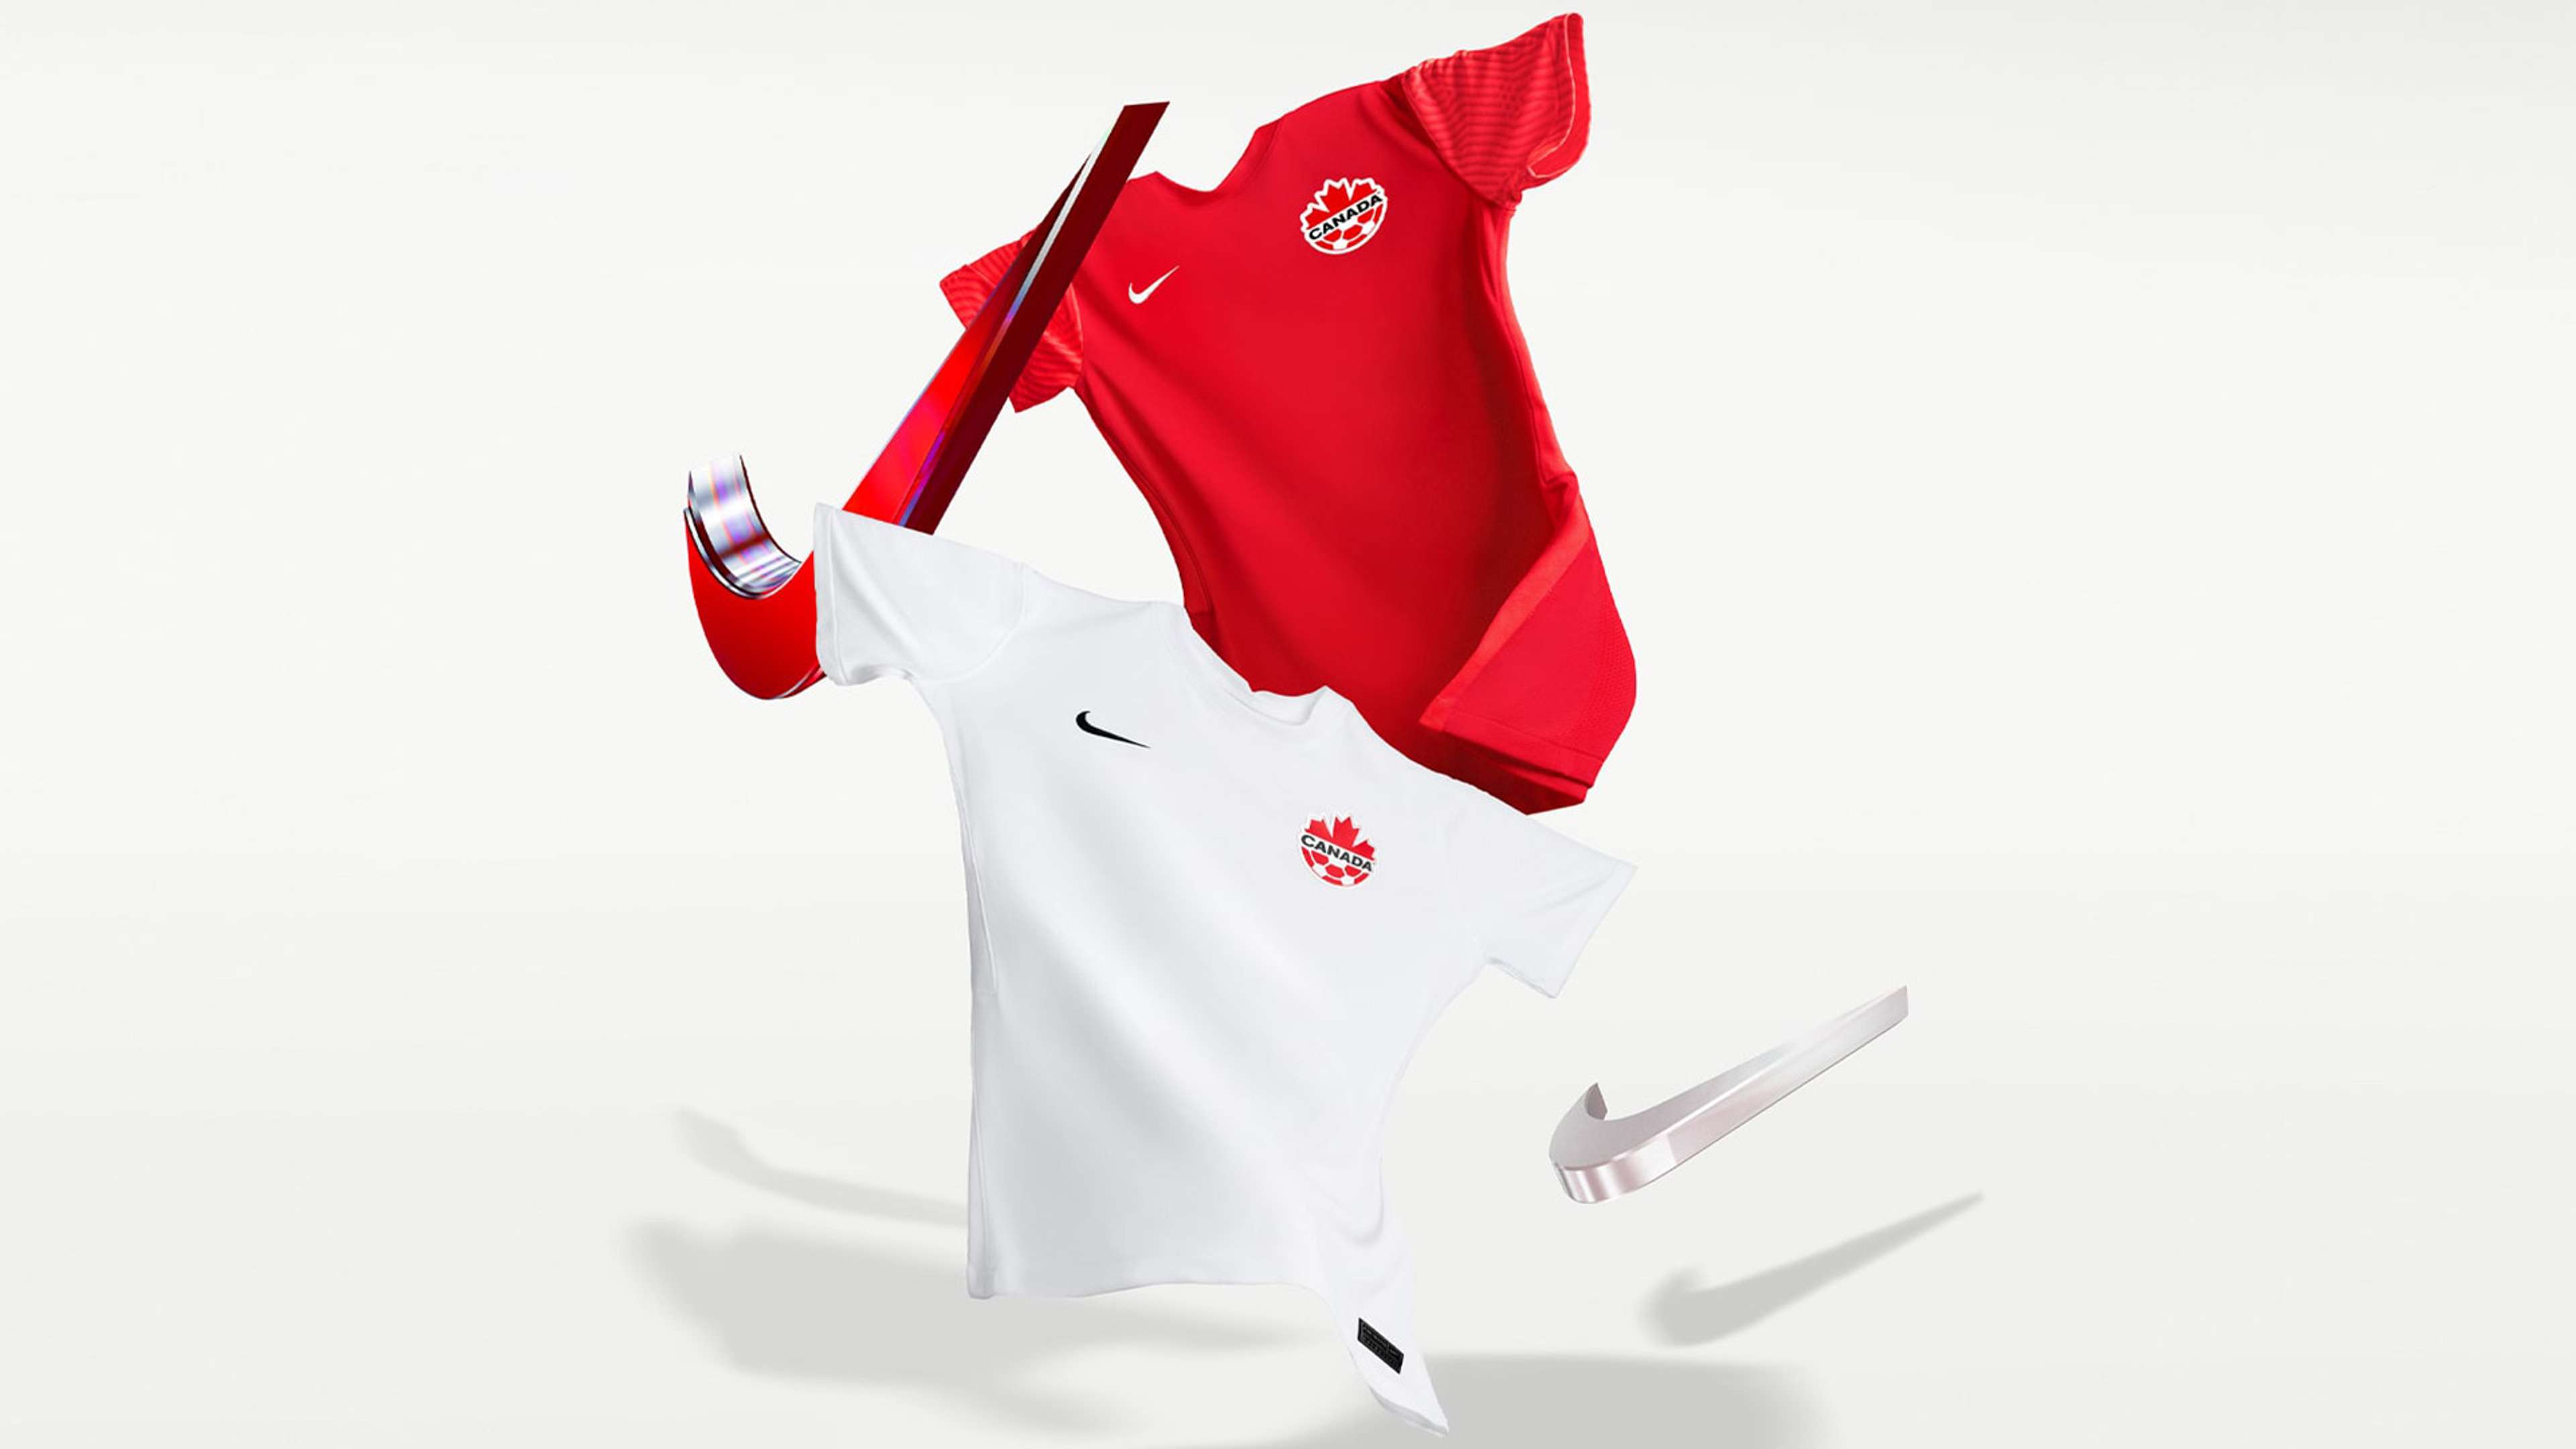 Canada WC kit